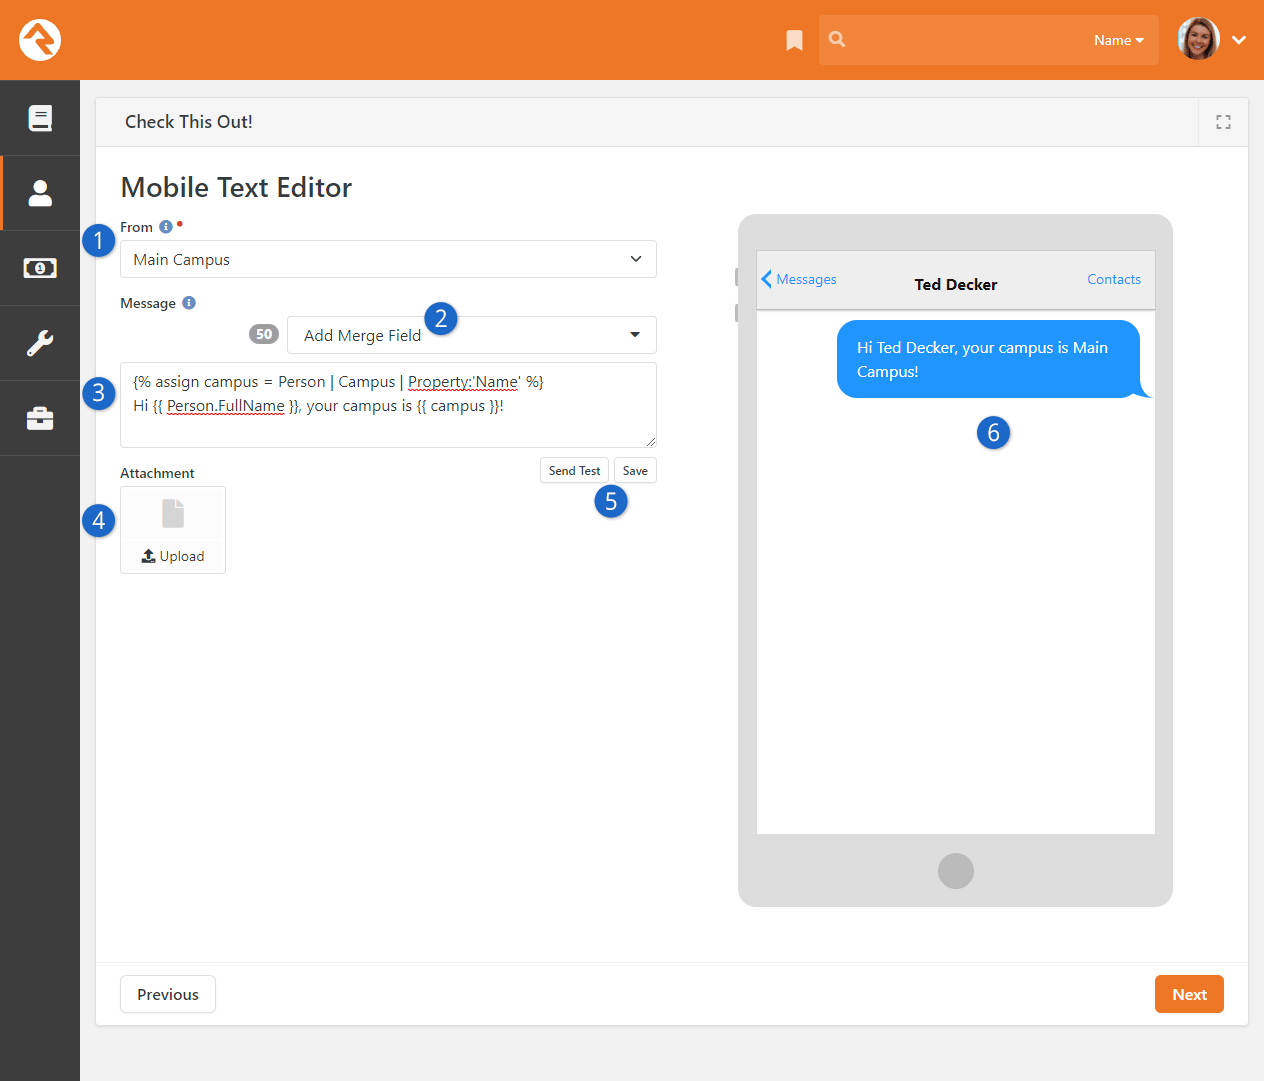 Mobile Text Editor